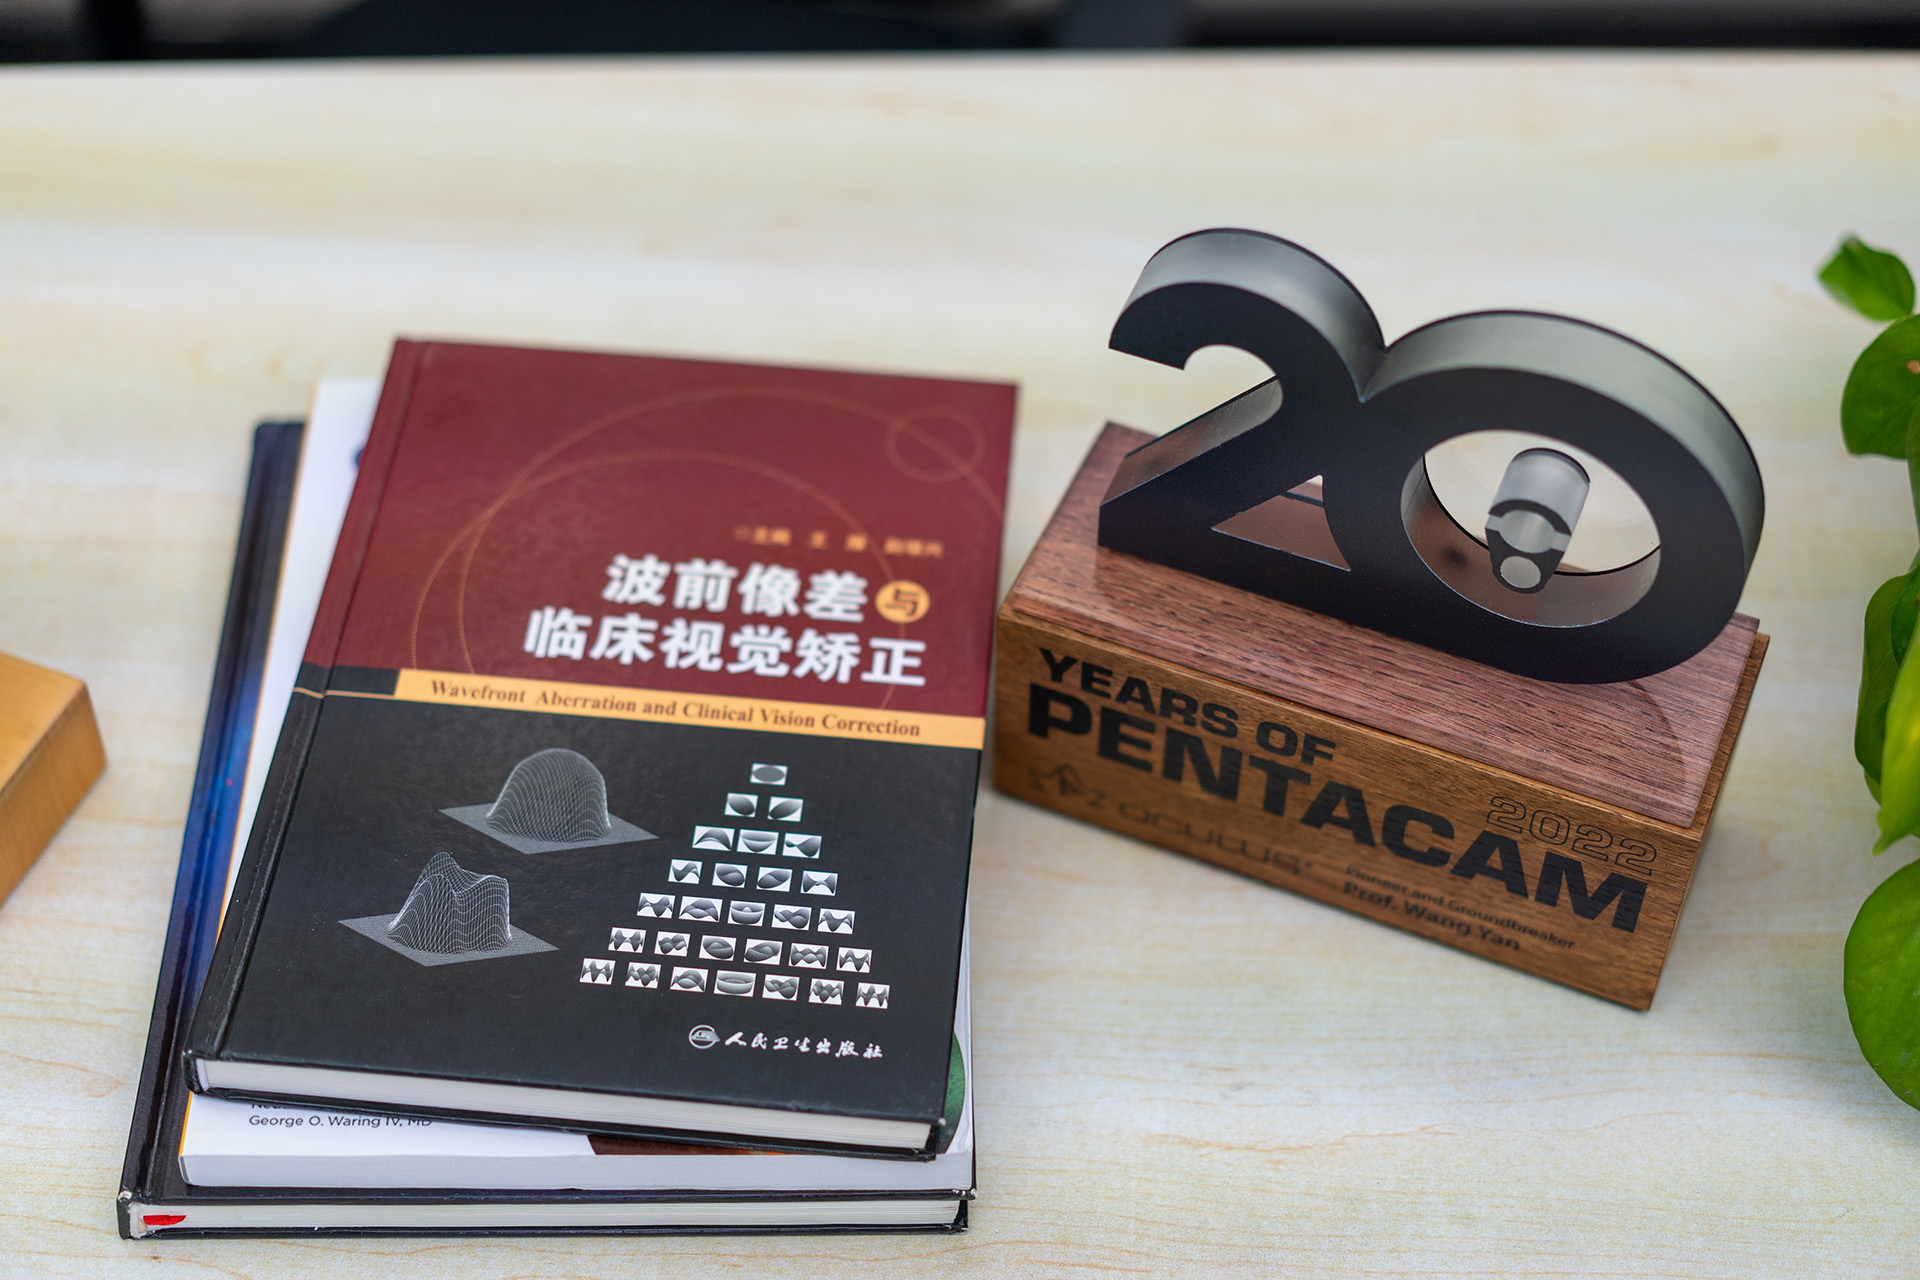 20th Anniversary Pentacam® Trophy for Prof Wang Yan and her books